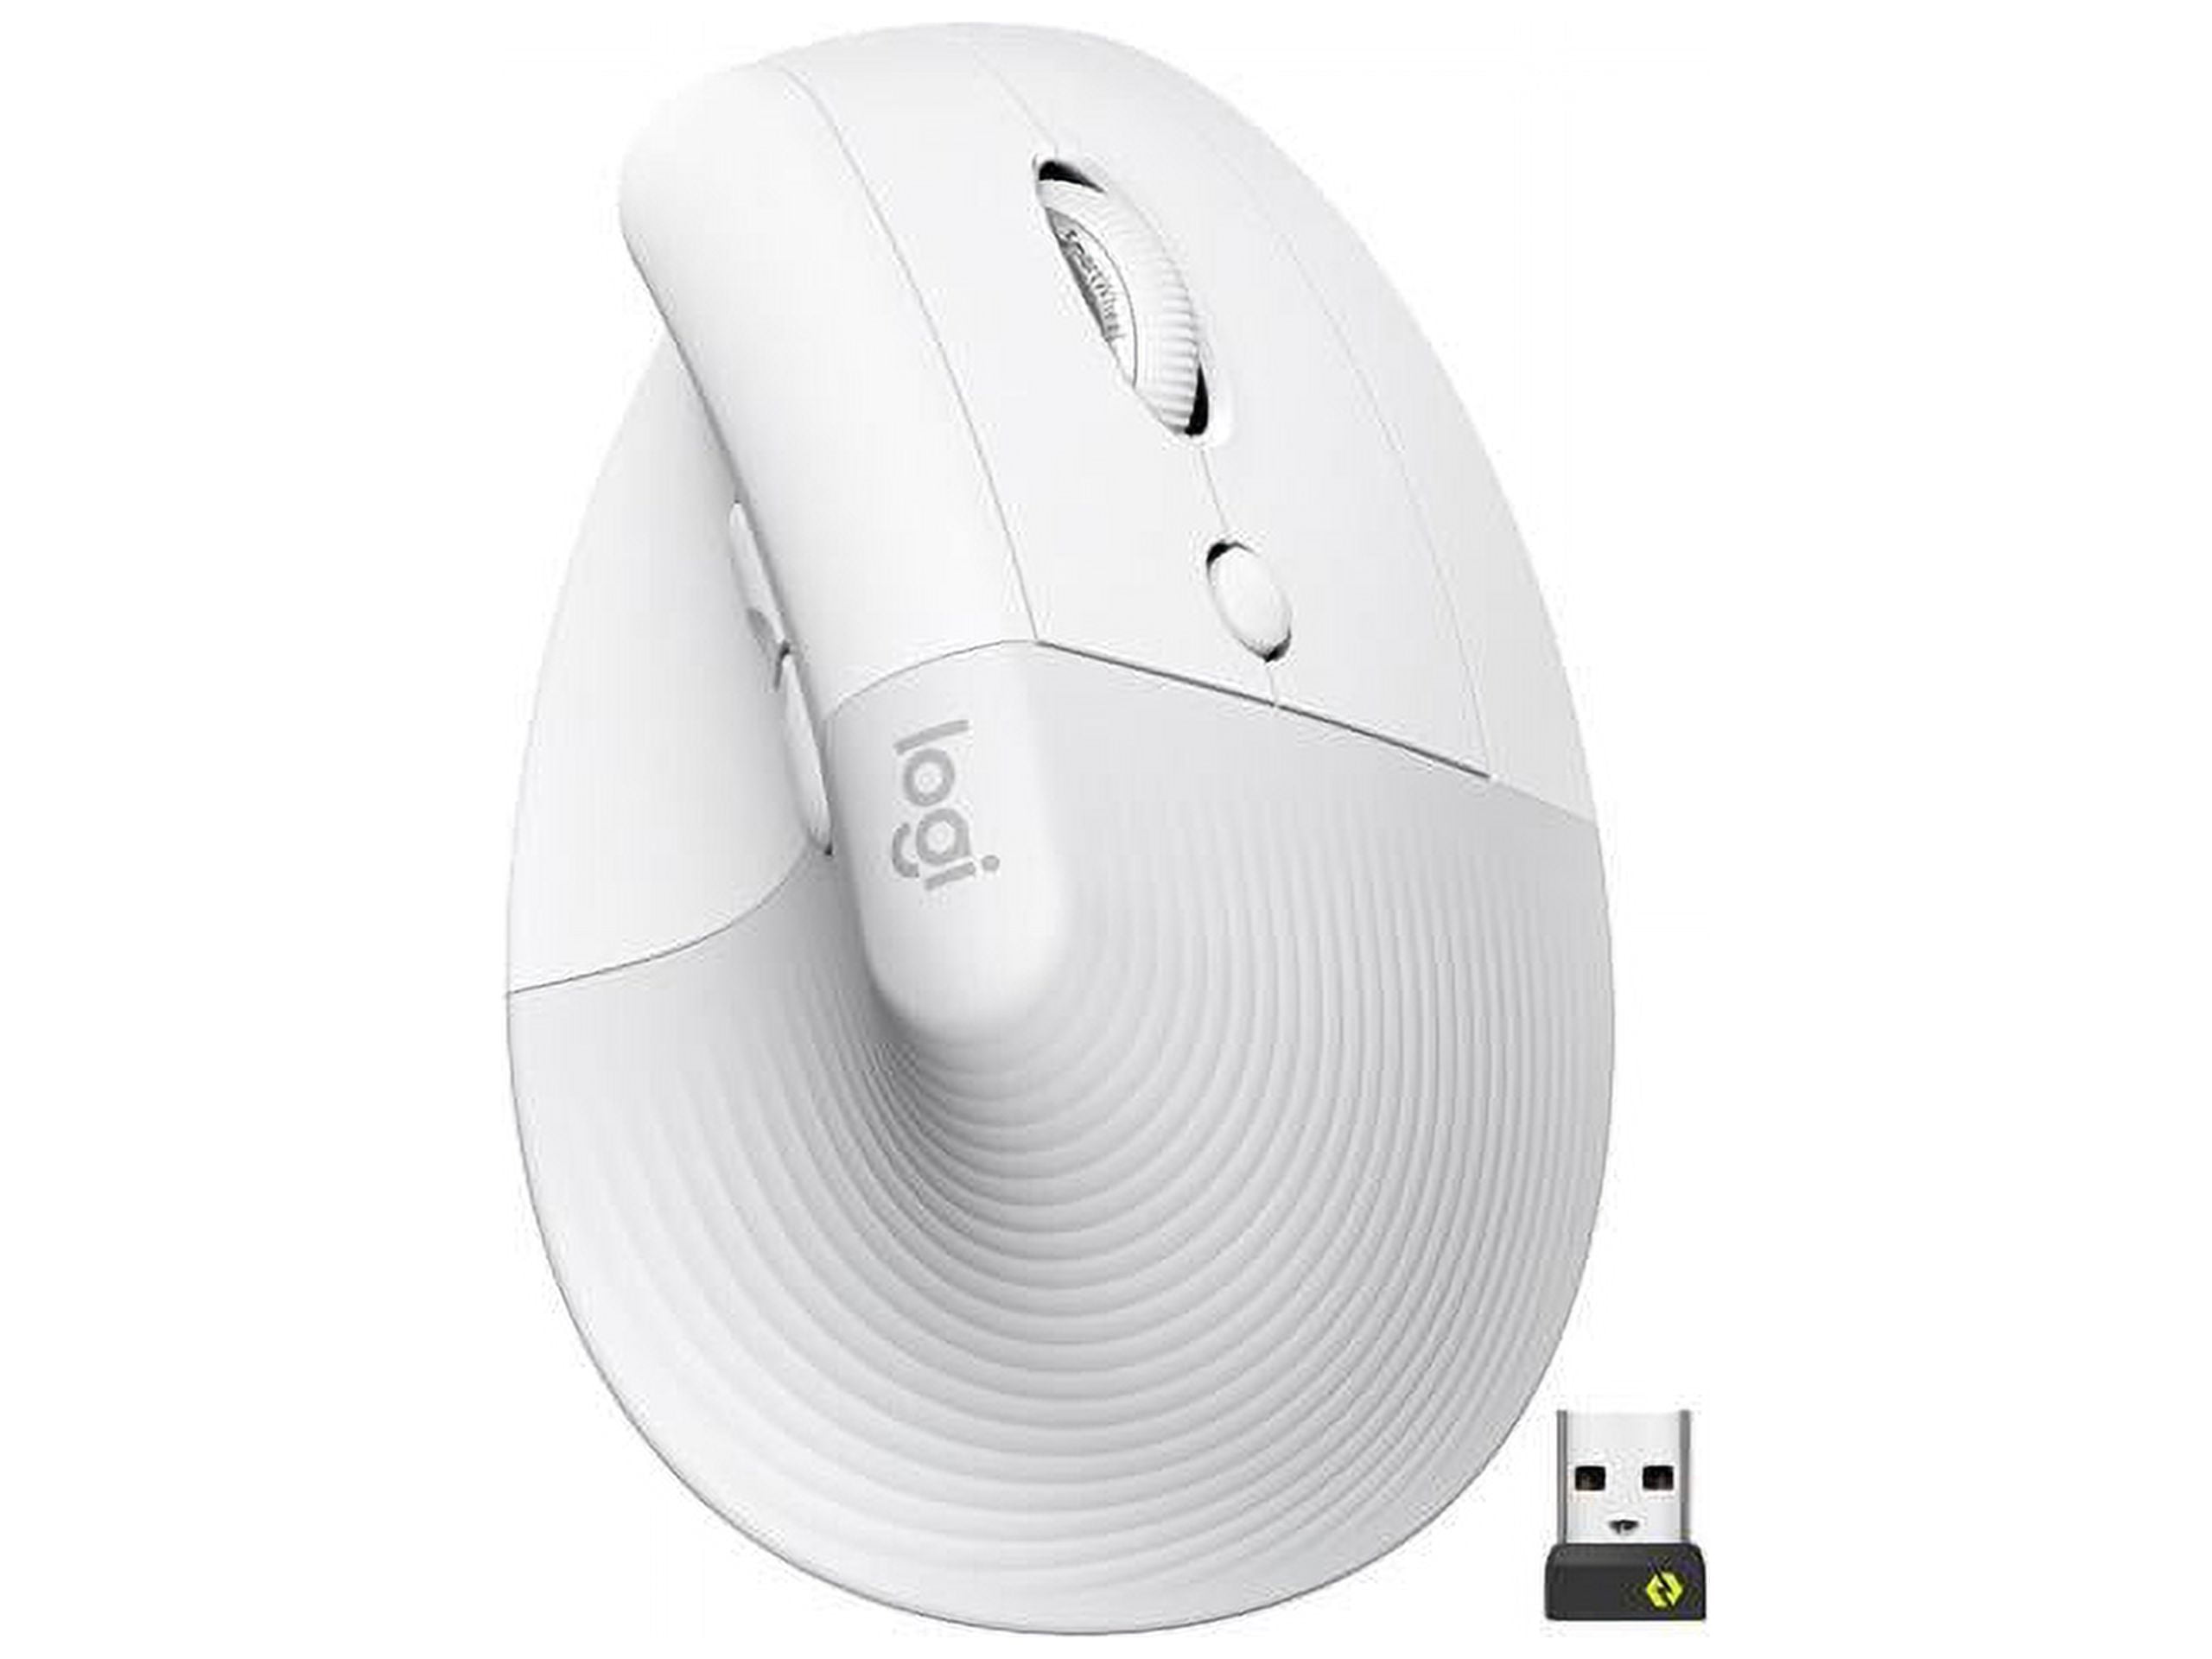 Logitech's New MX Anywhere 3 Mouse Will Have You Reaching For Your Credit  Card